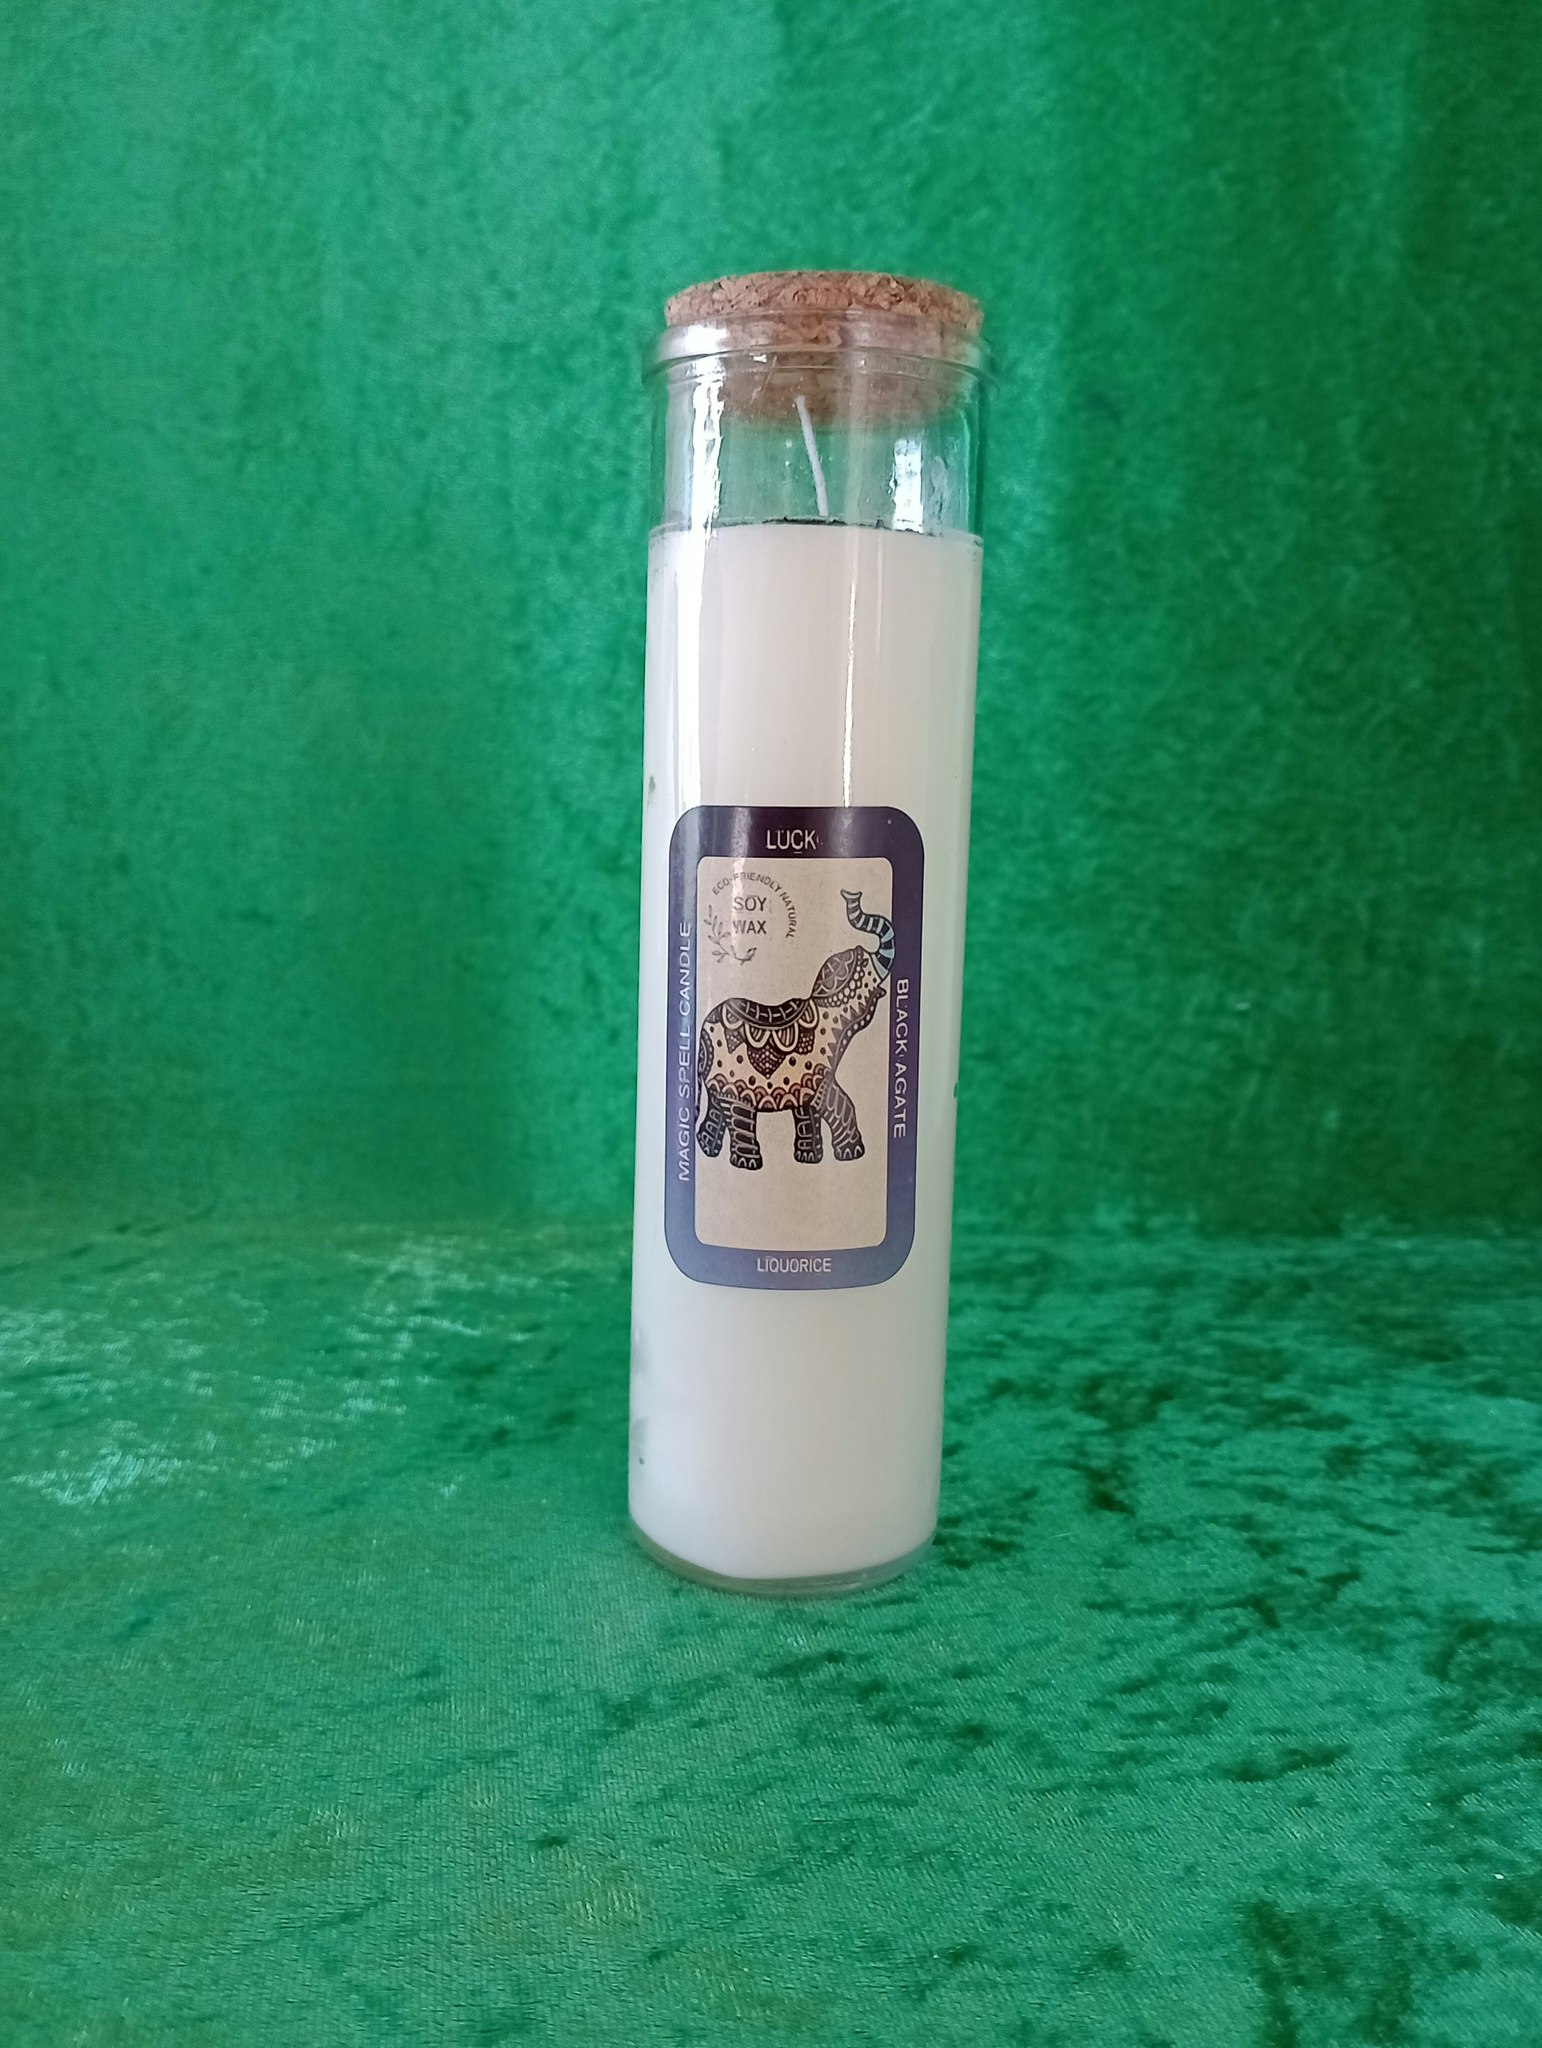 Magic Spell Candle - Tur (Luck)